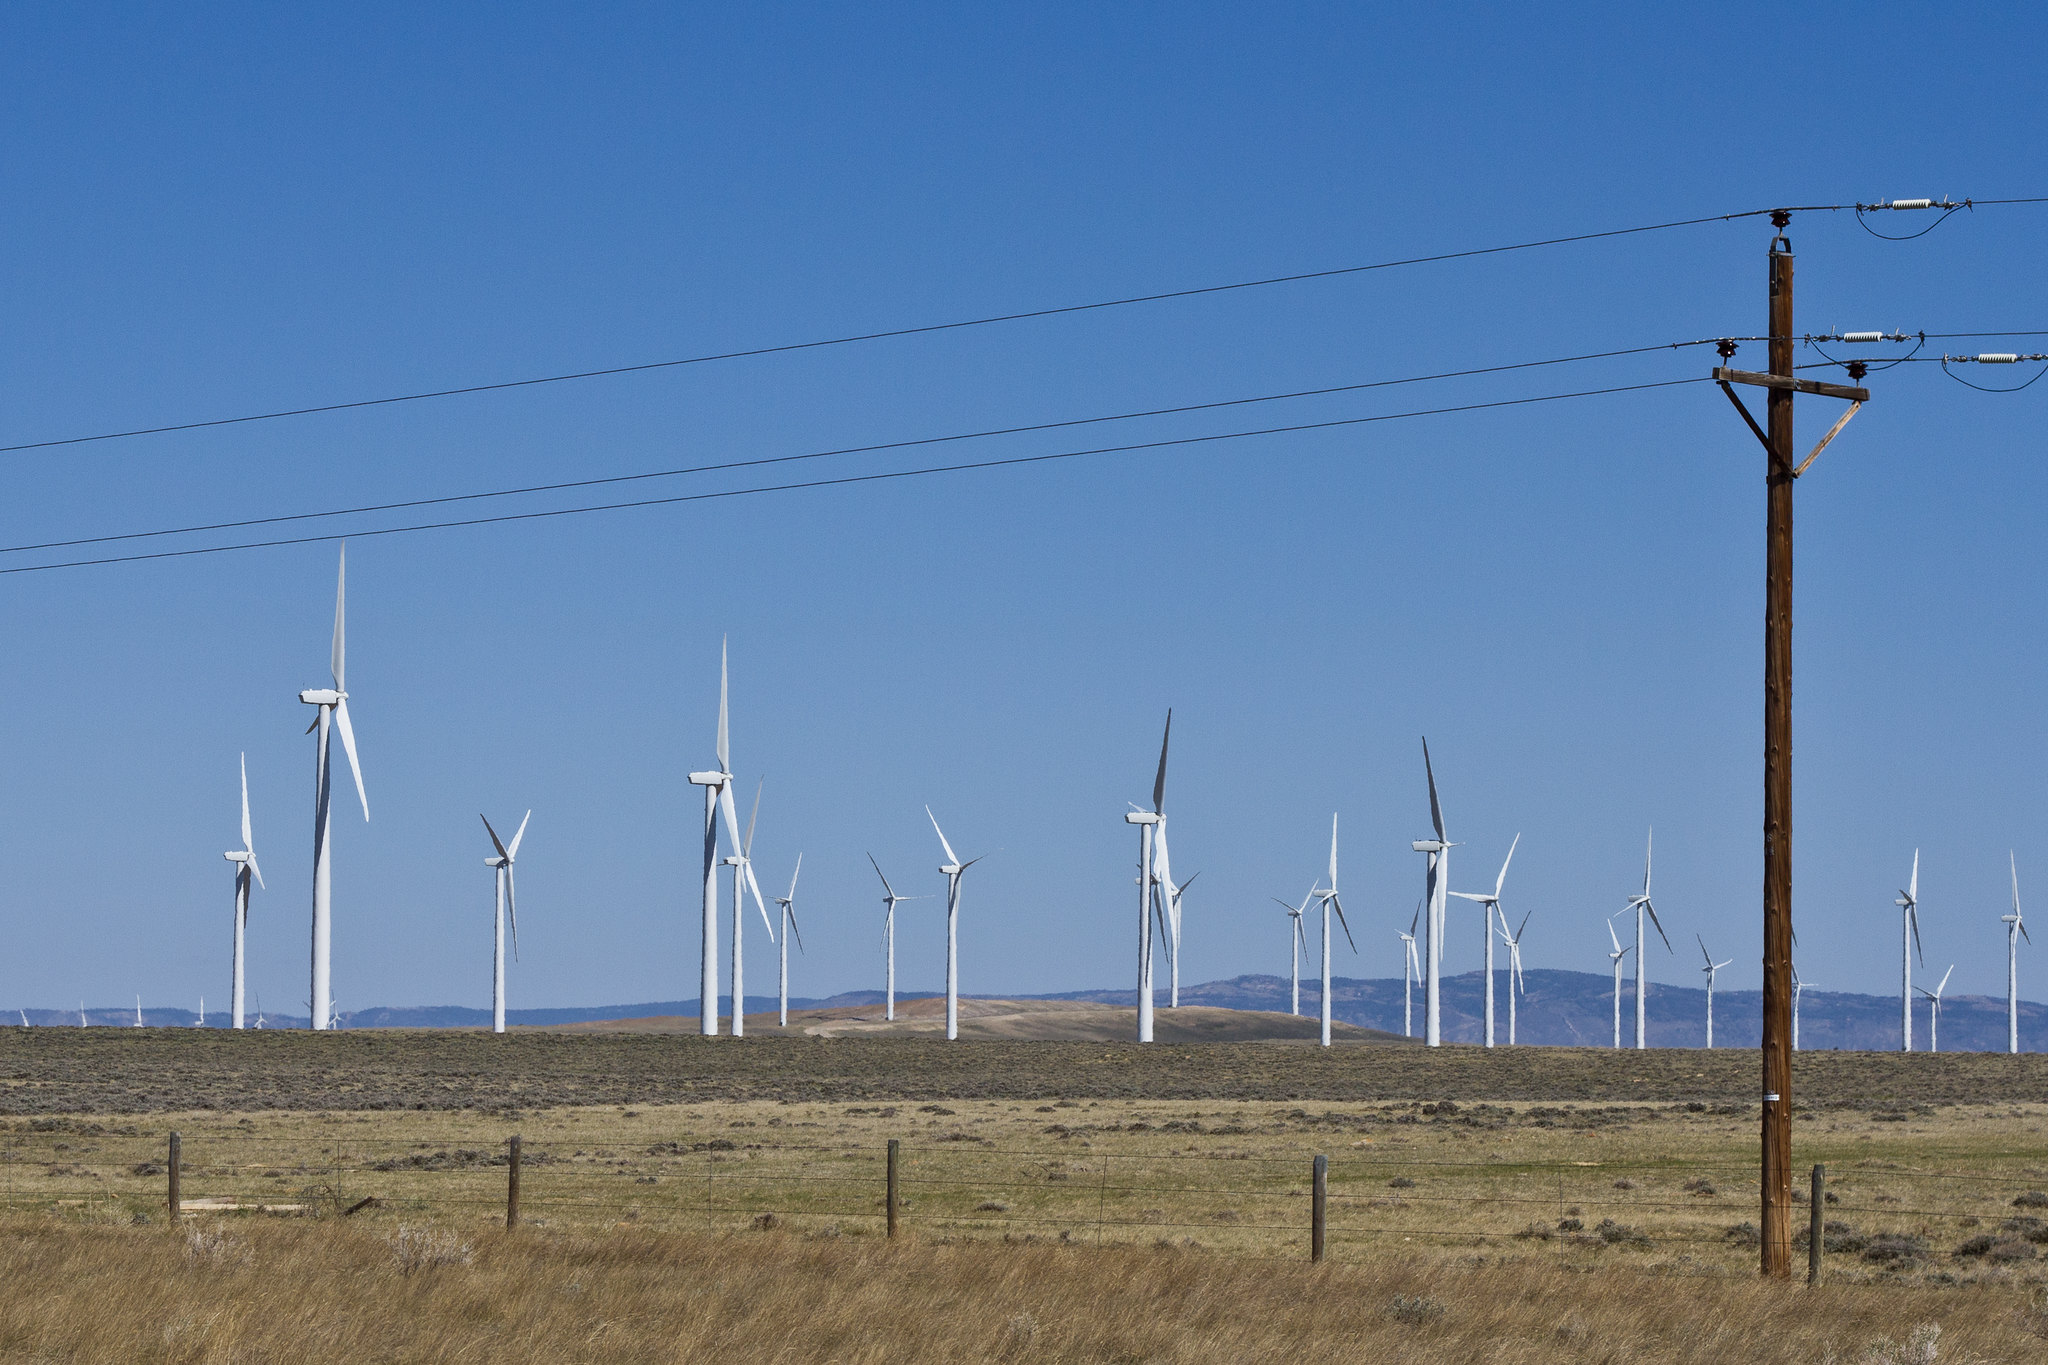 Photograph of a wind farm near Medicine Bow, Wyoming. The photo shows large white wind turbines scattered on a flat grassy and shrubby landscape. Low hills rise in the background.